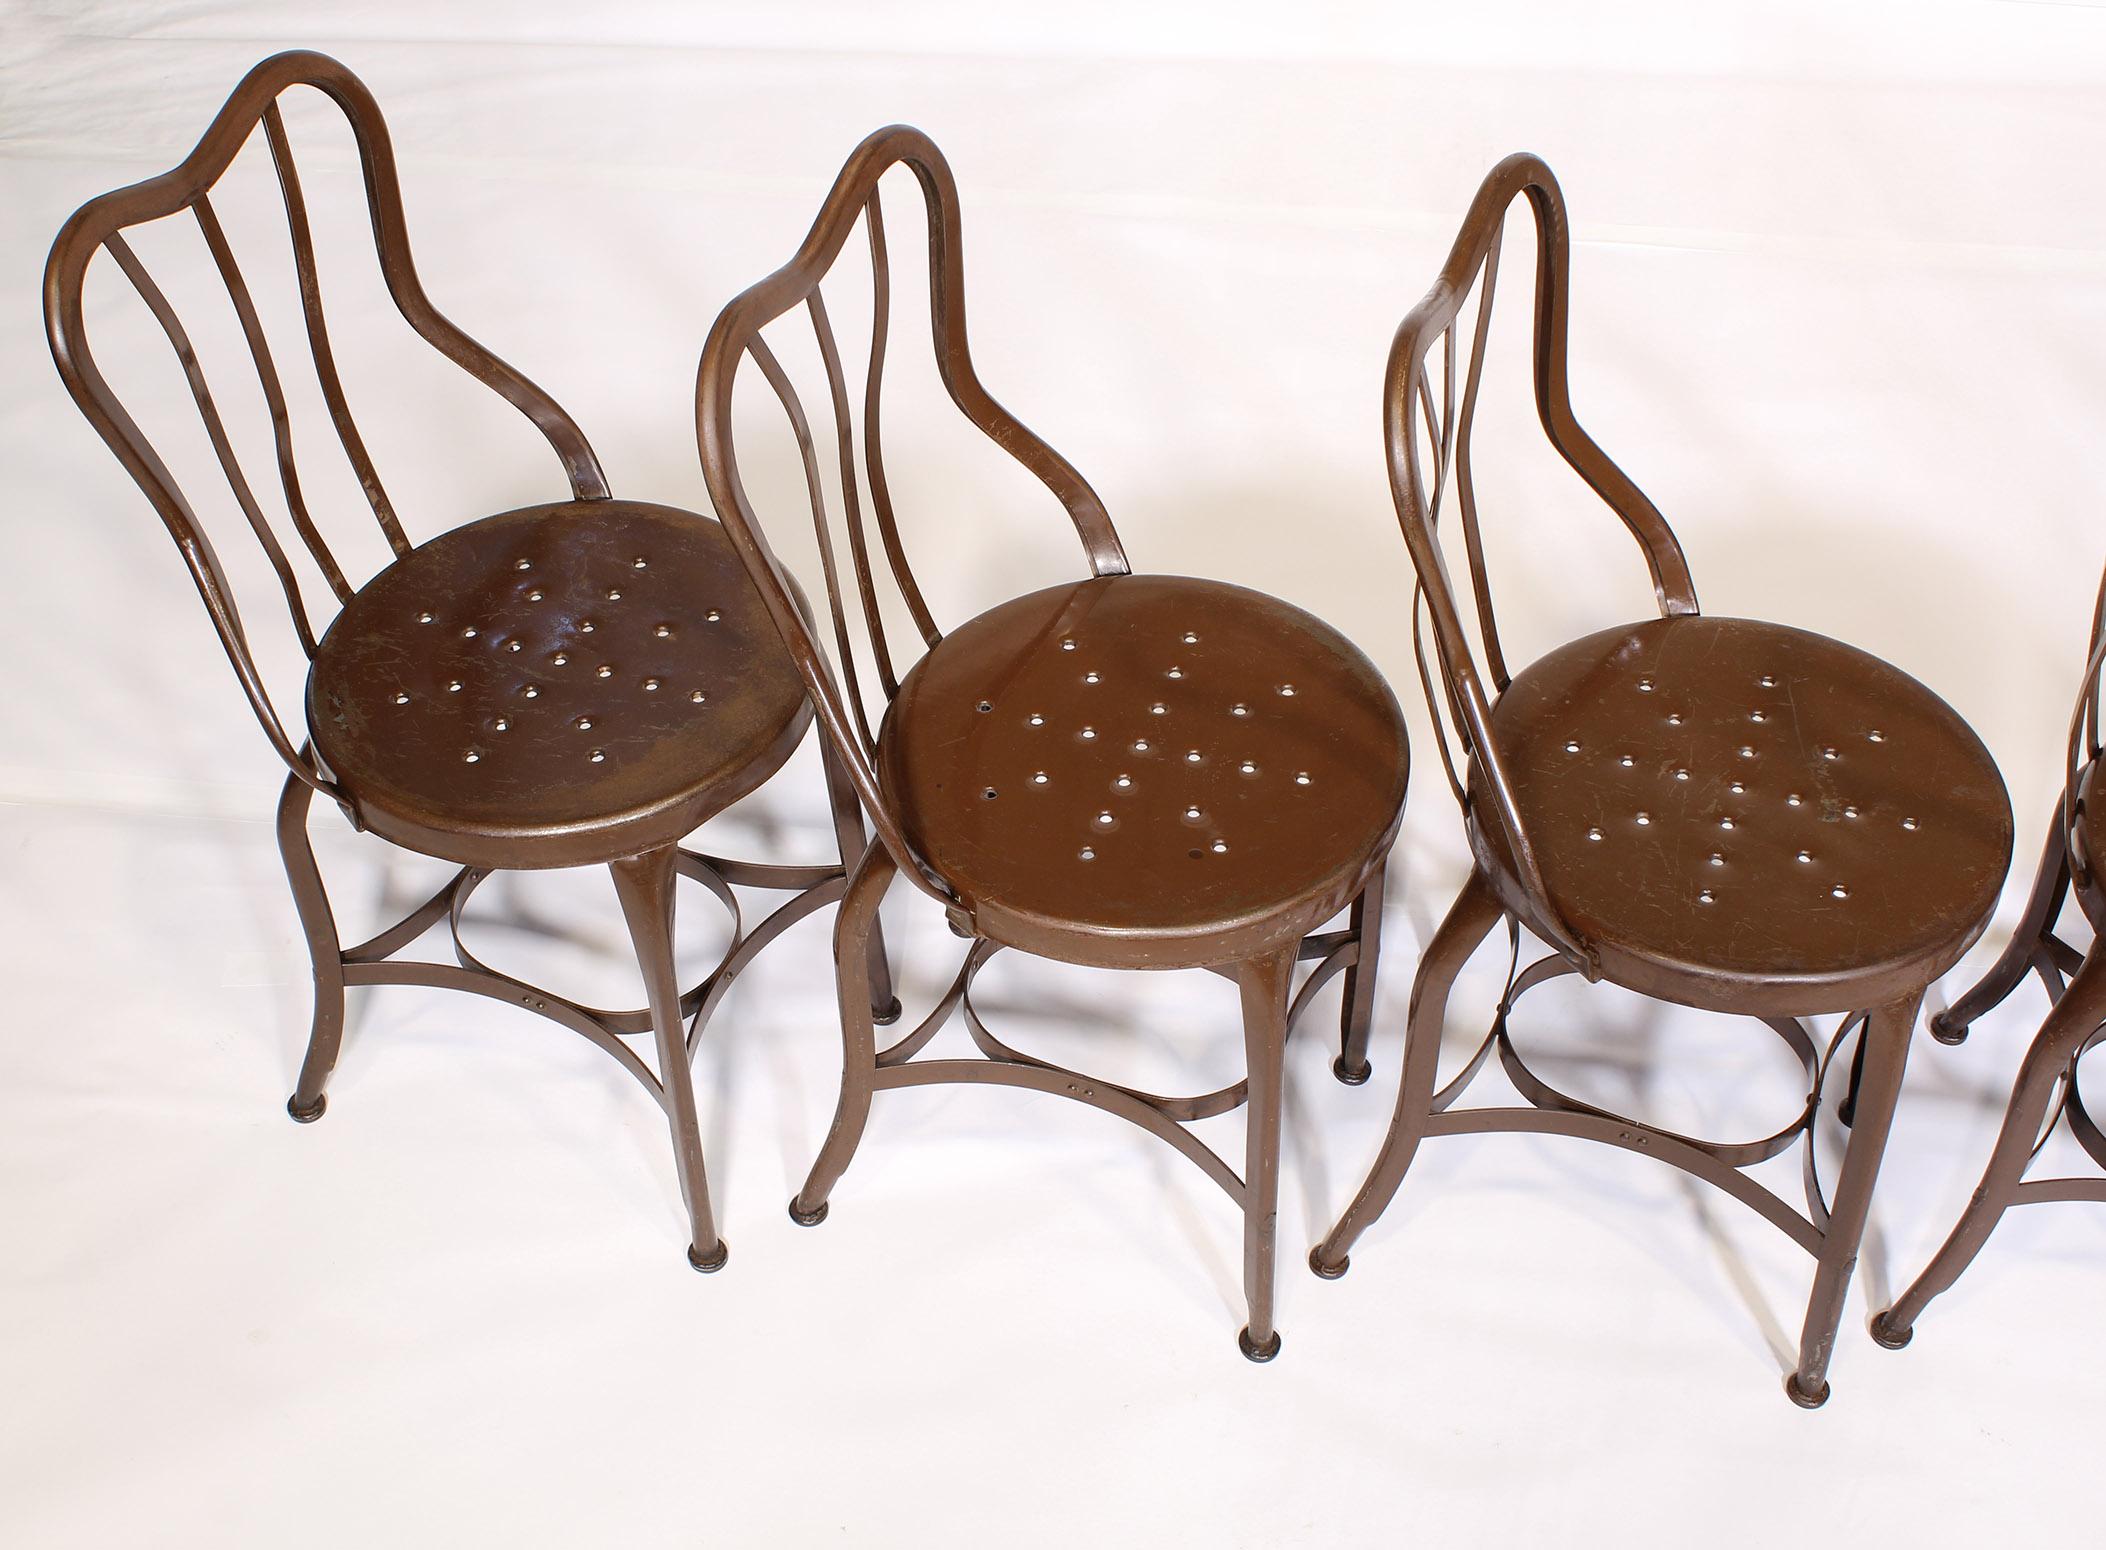 Industrial Set of 5 Antique Metal Cafe Chairs by Toledo